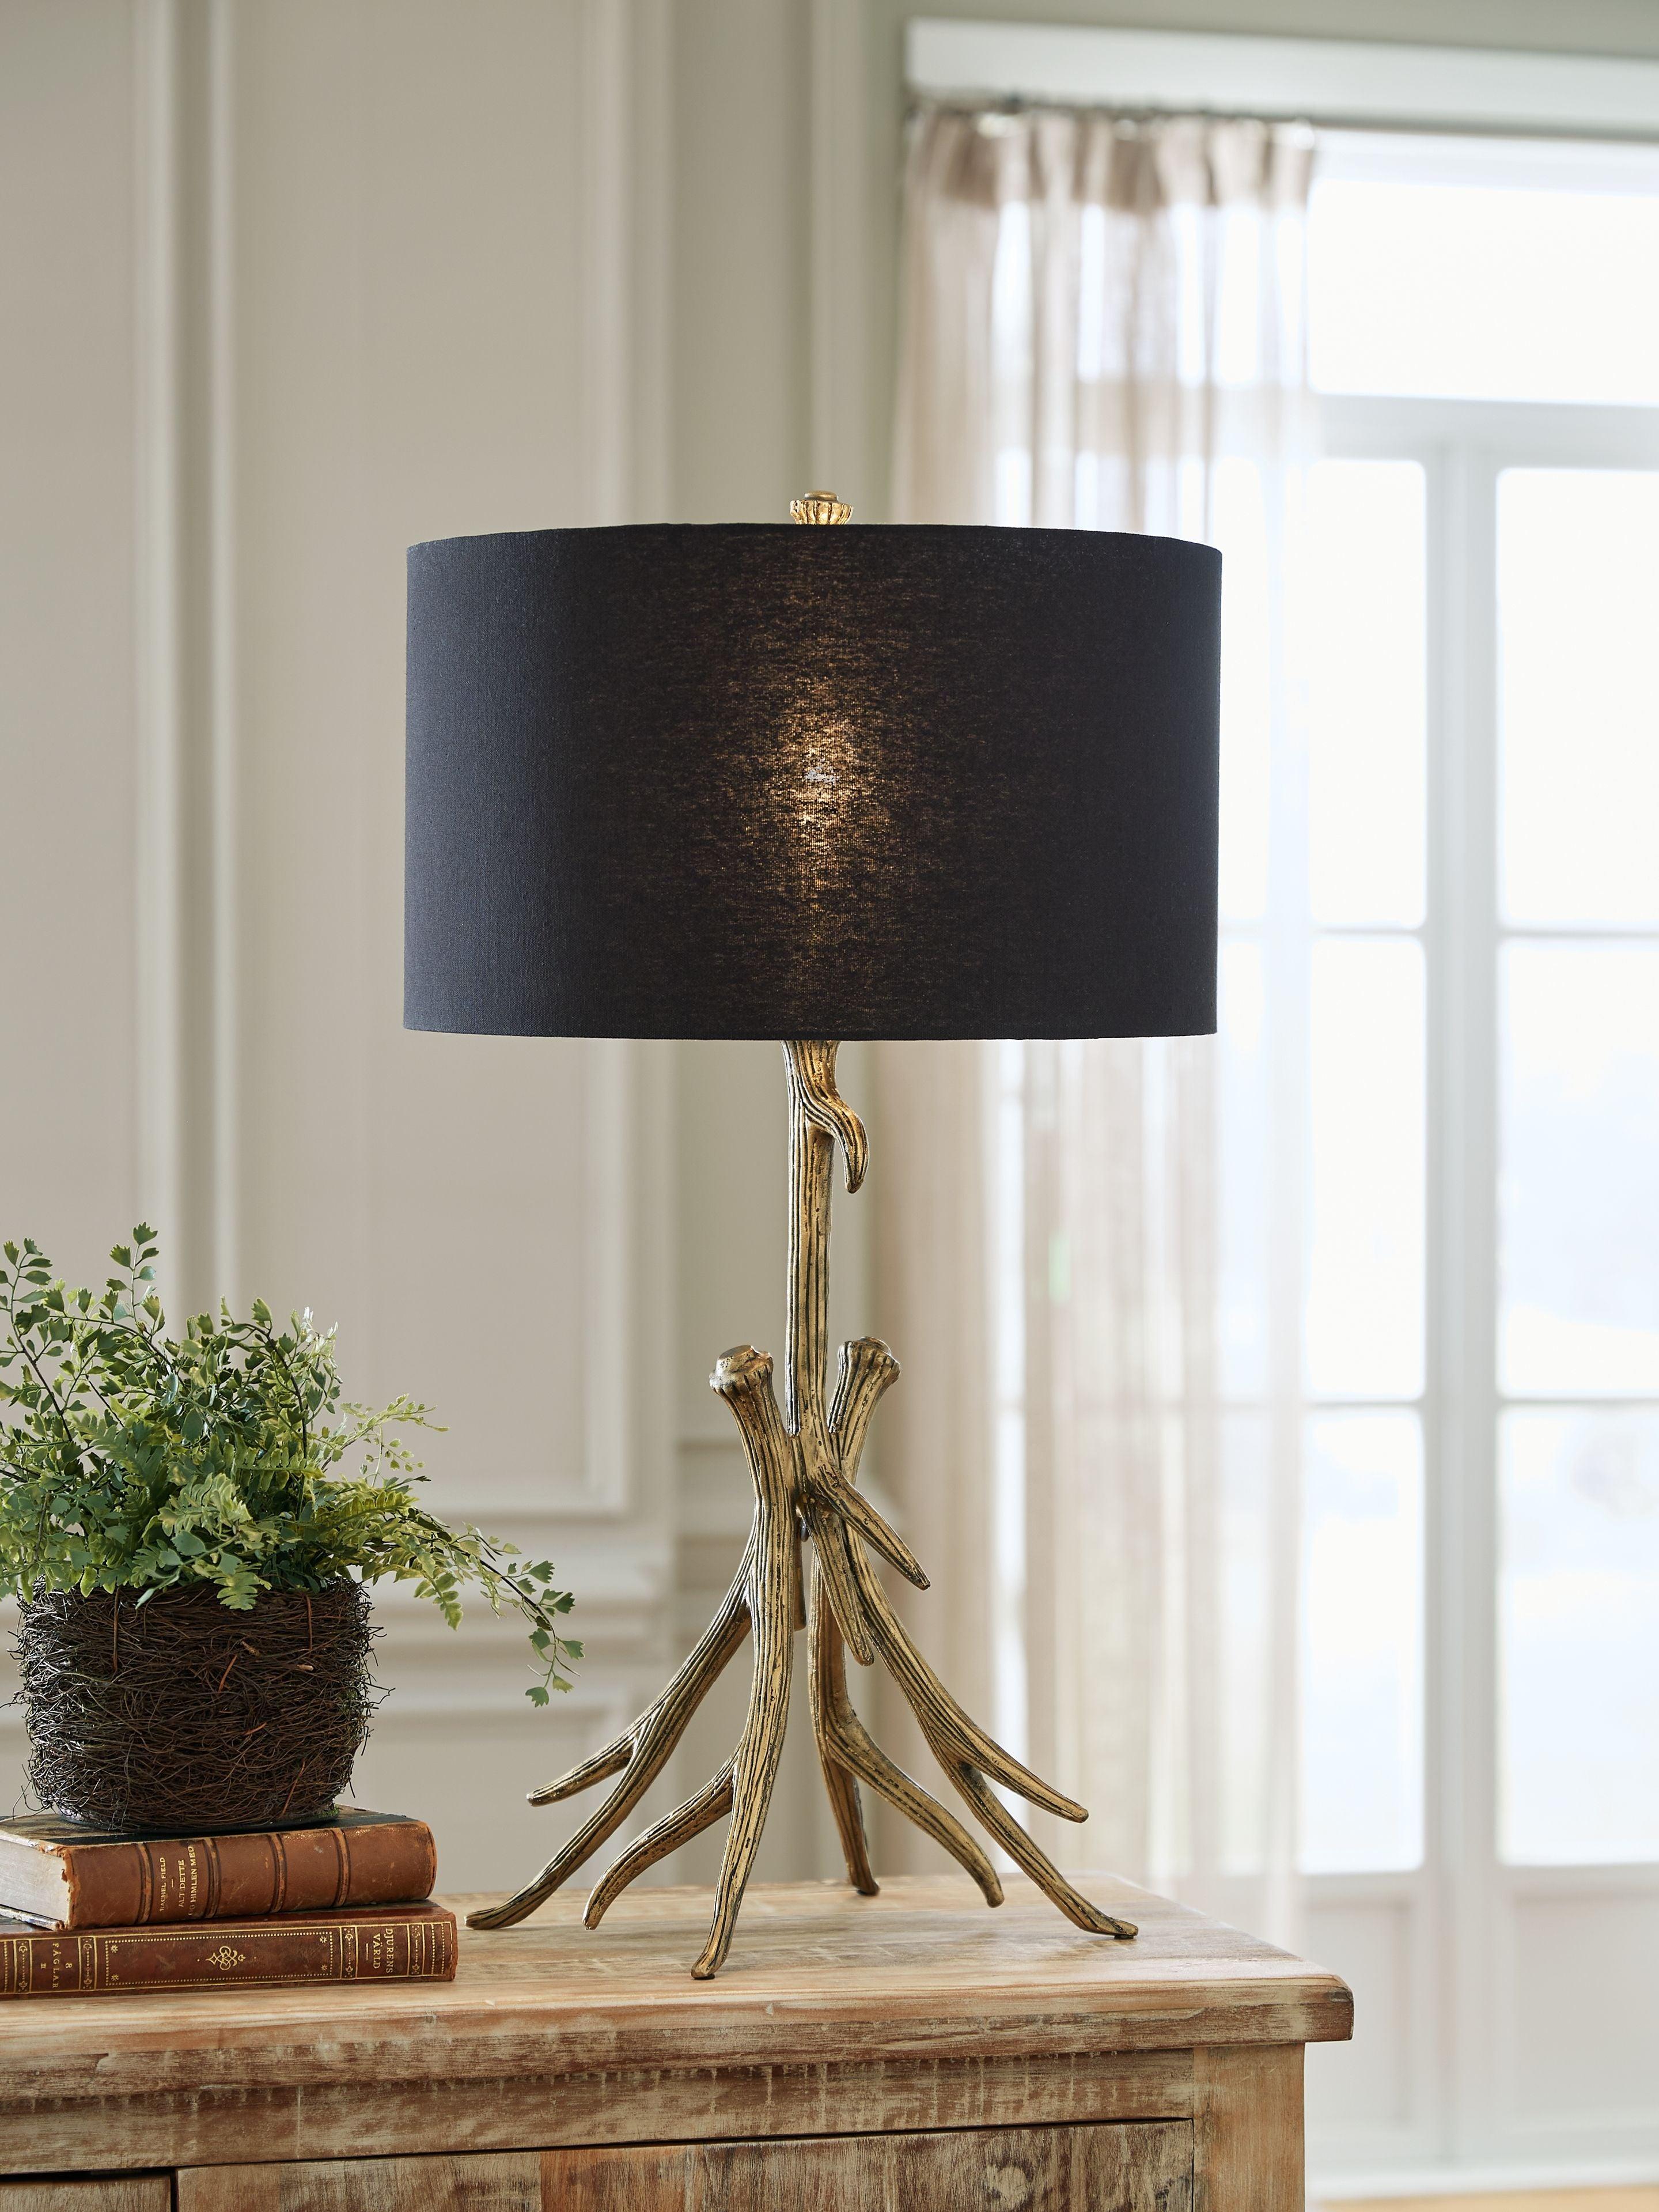 Signature Design by Ashley® - Josney - Antique Gold Finish - Metal Table Lamp - 5th Avenue Furniture